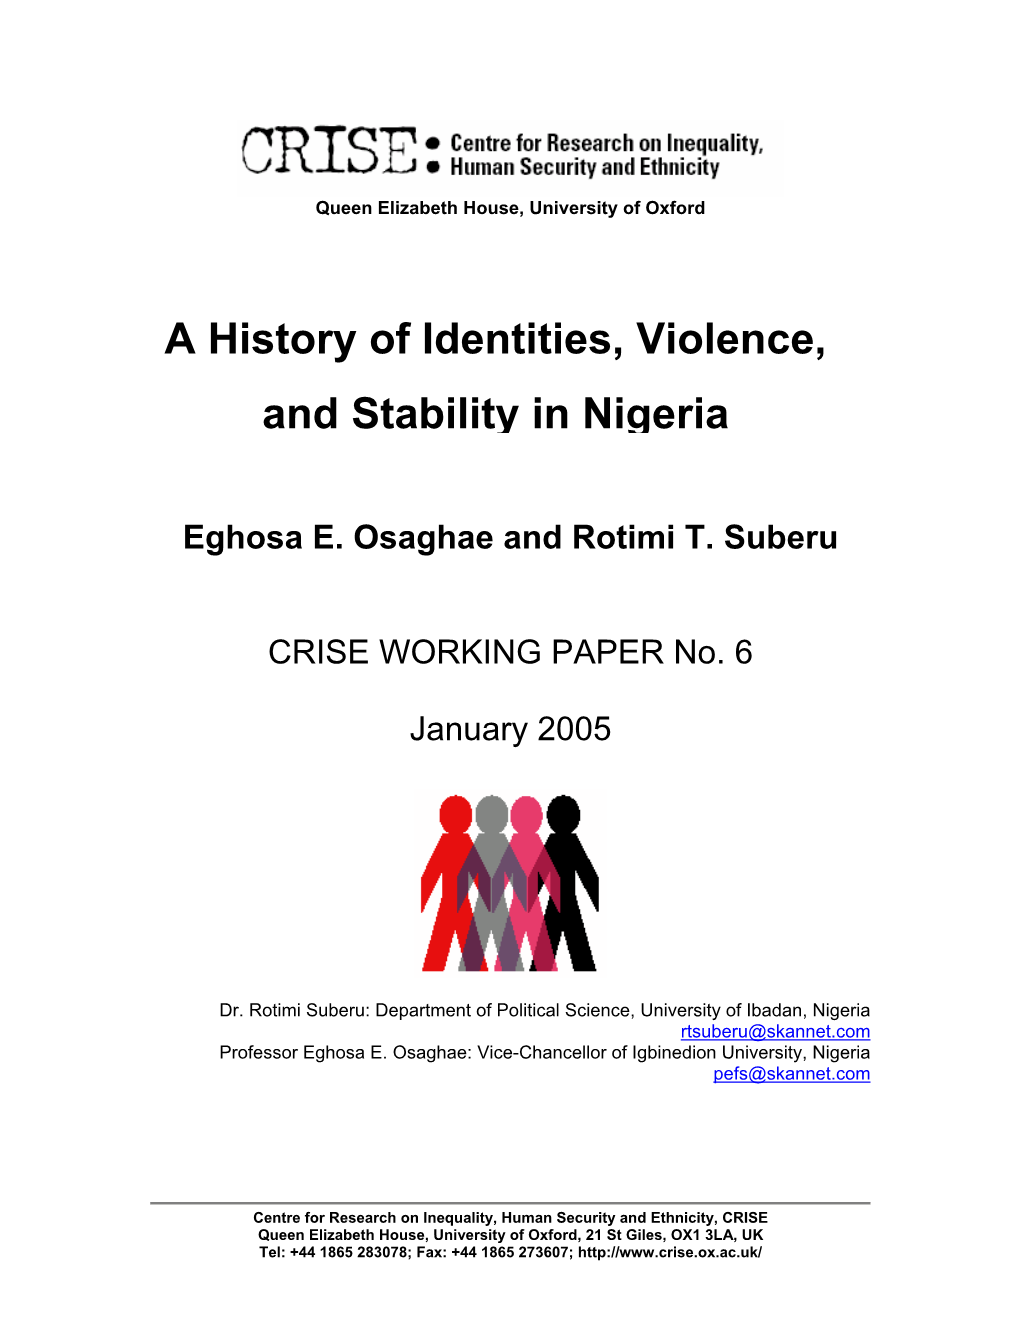 The History of Identities and Violent Conflicts in Nigeria